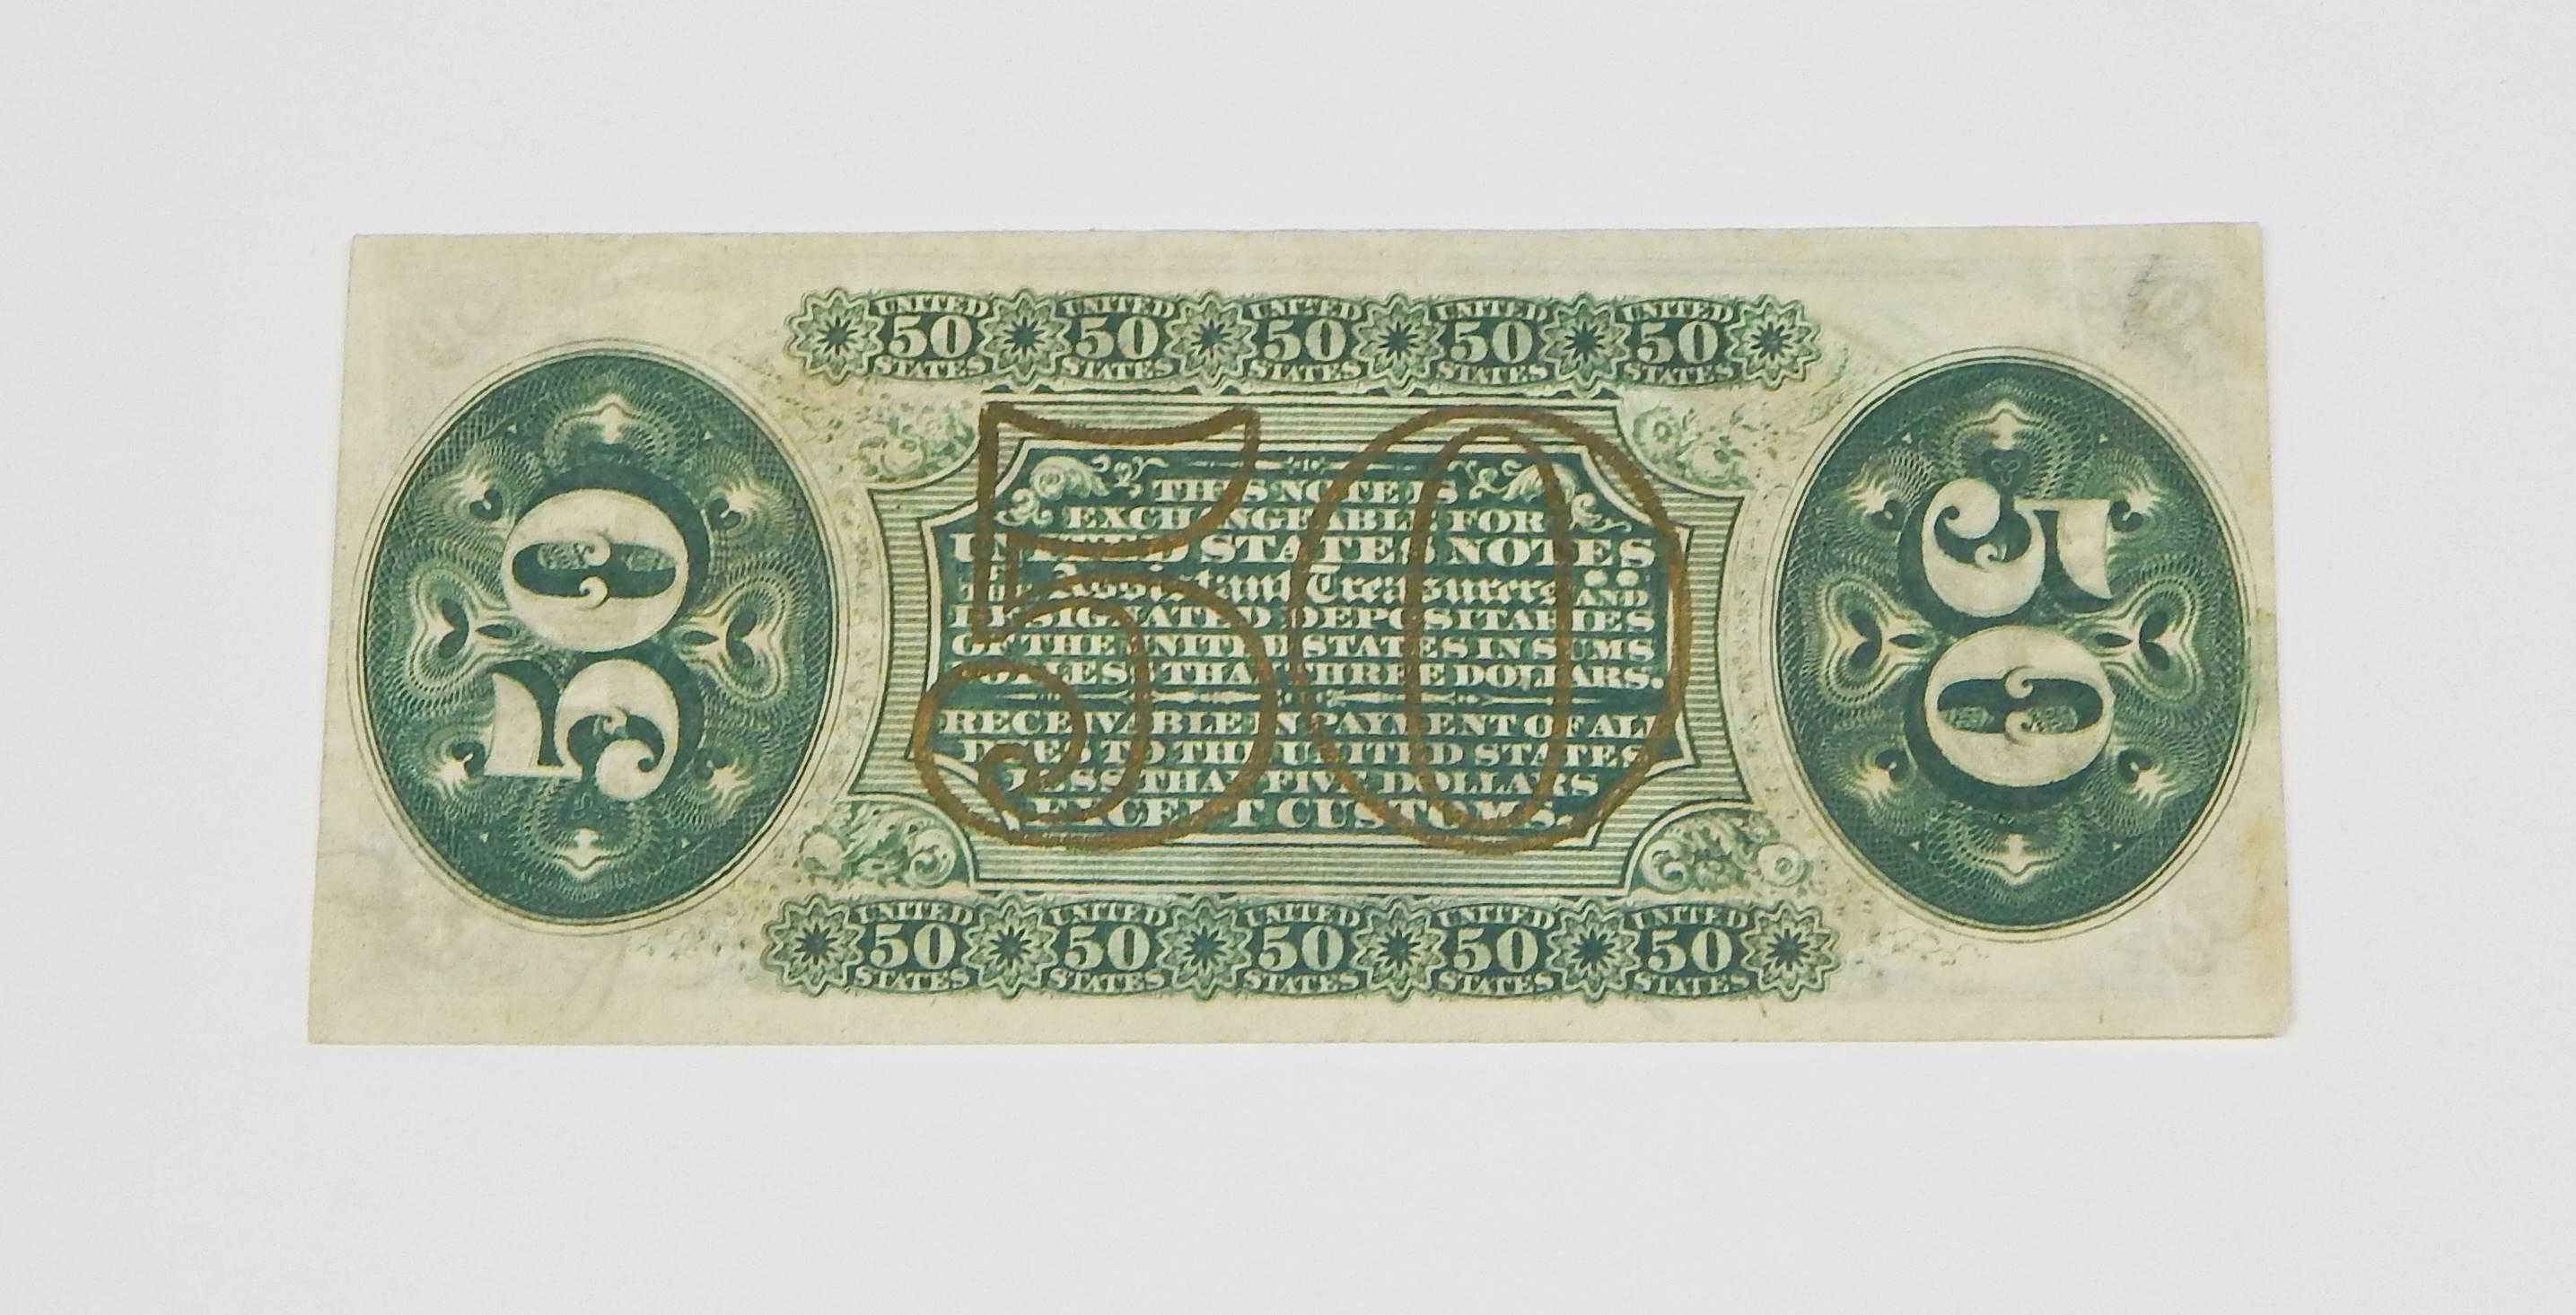 FRACTIONAL CURRENCY - THIRD ISSUE 50 CENT NOTE, GREEN BACK, SPINNER